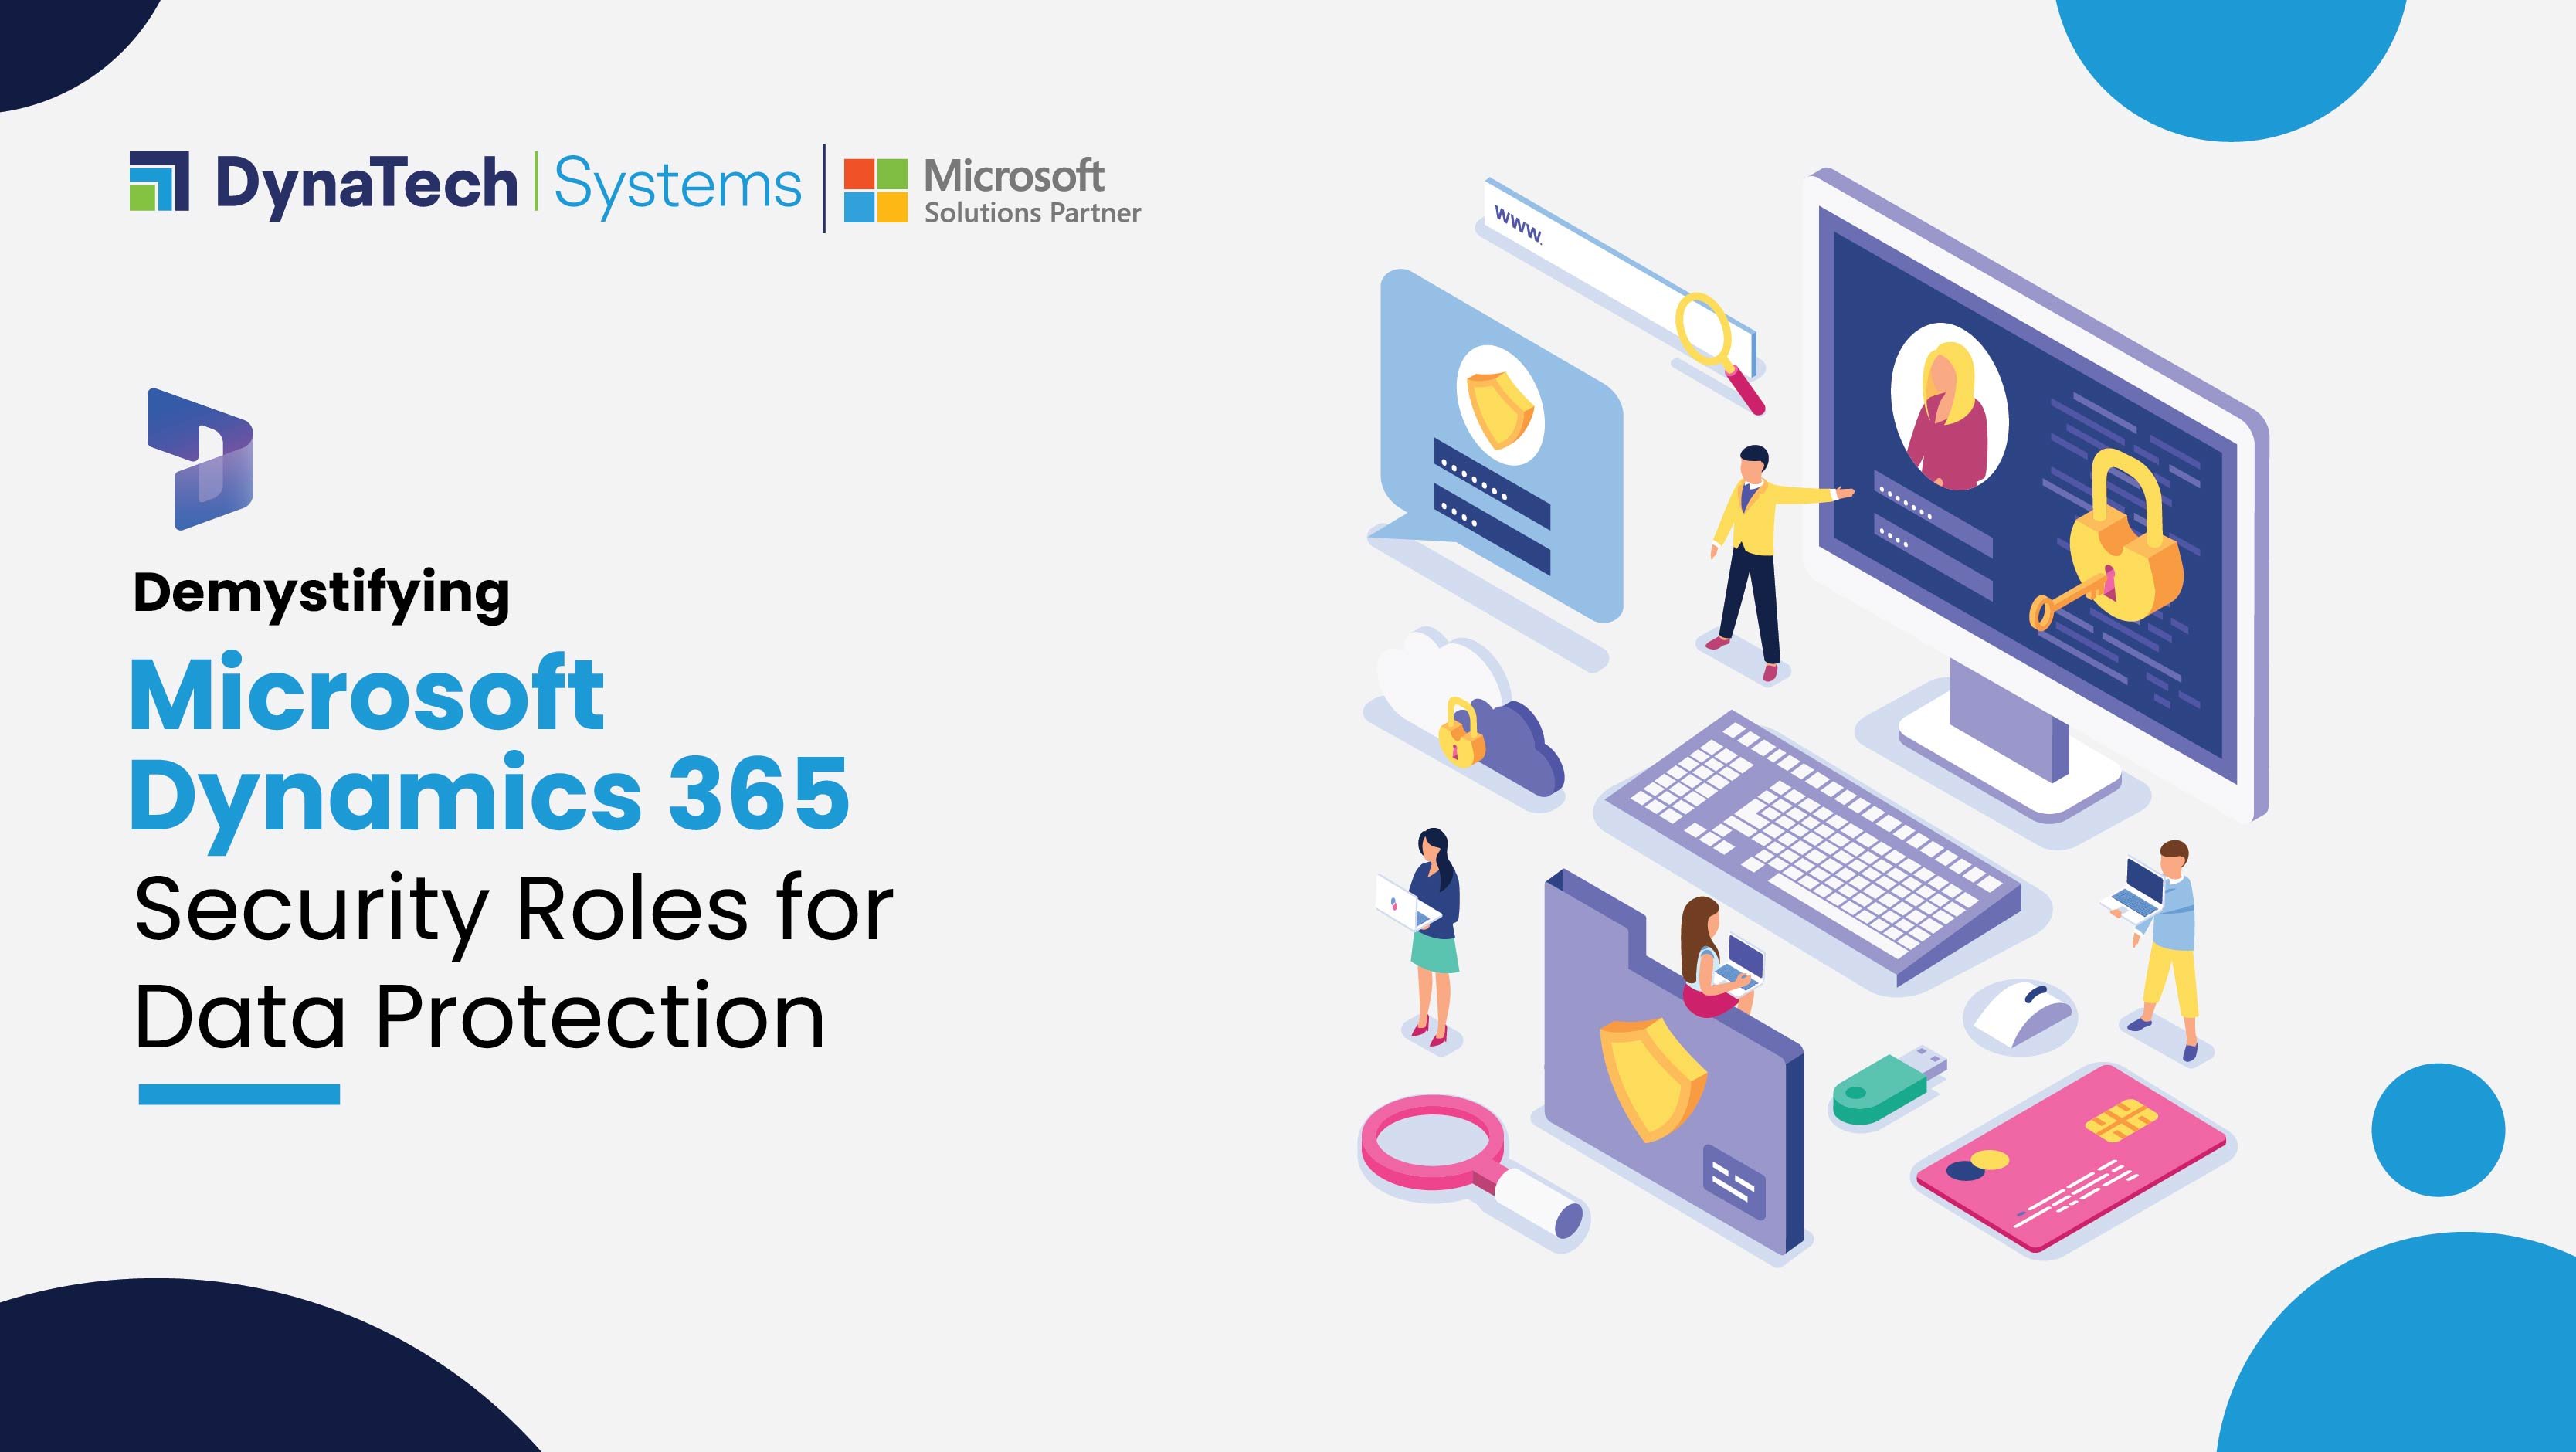 Demystifying Microsoft Dynamics 365 Security Roles for Data Protection